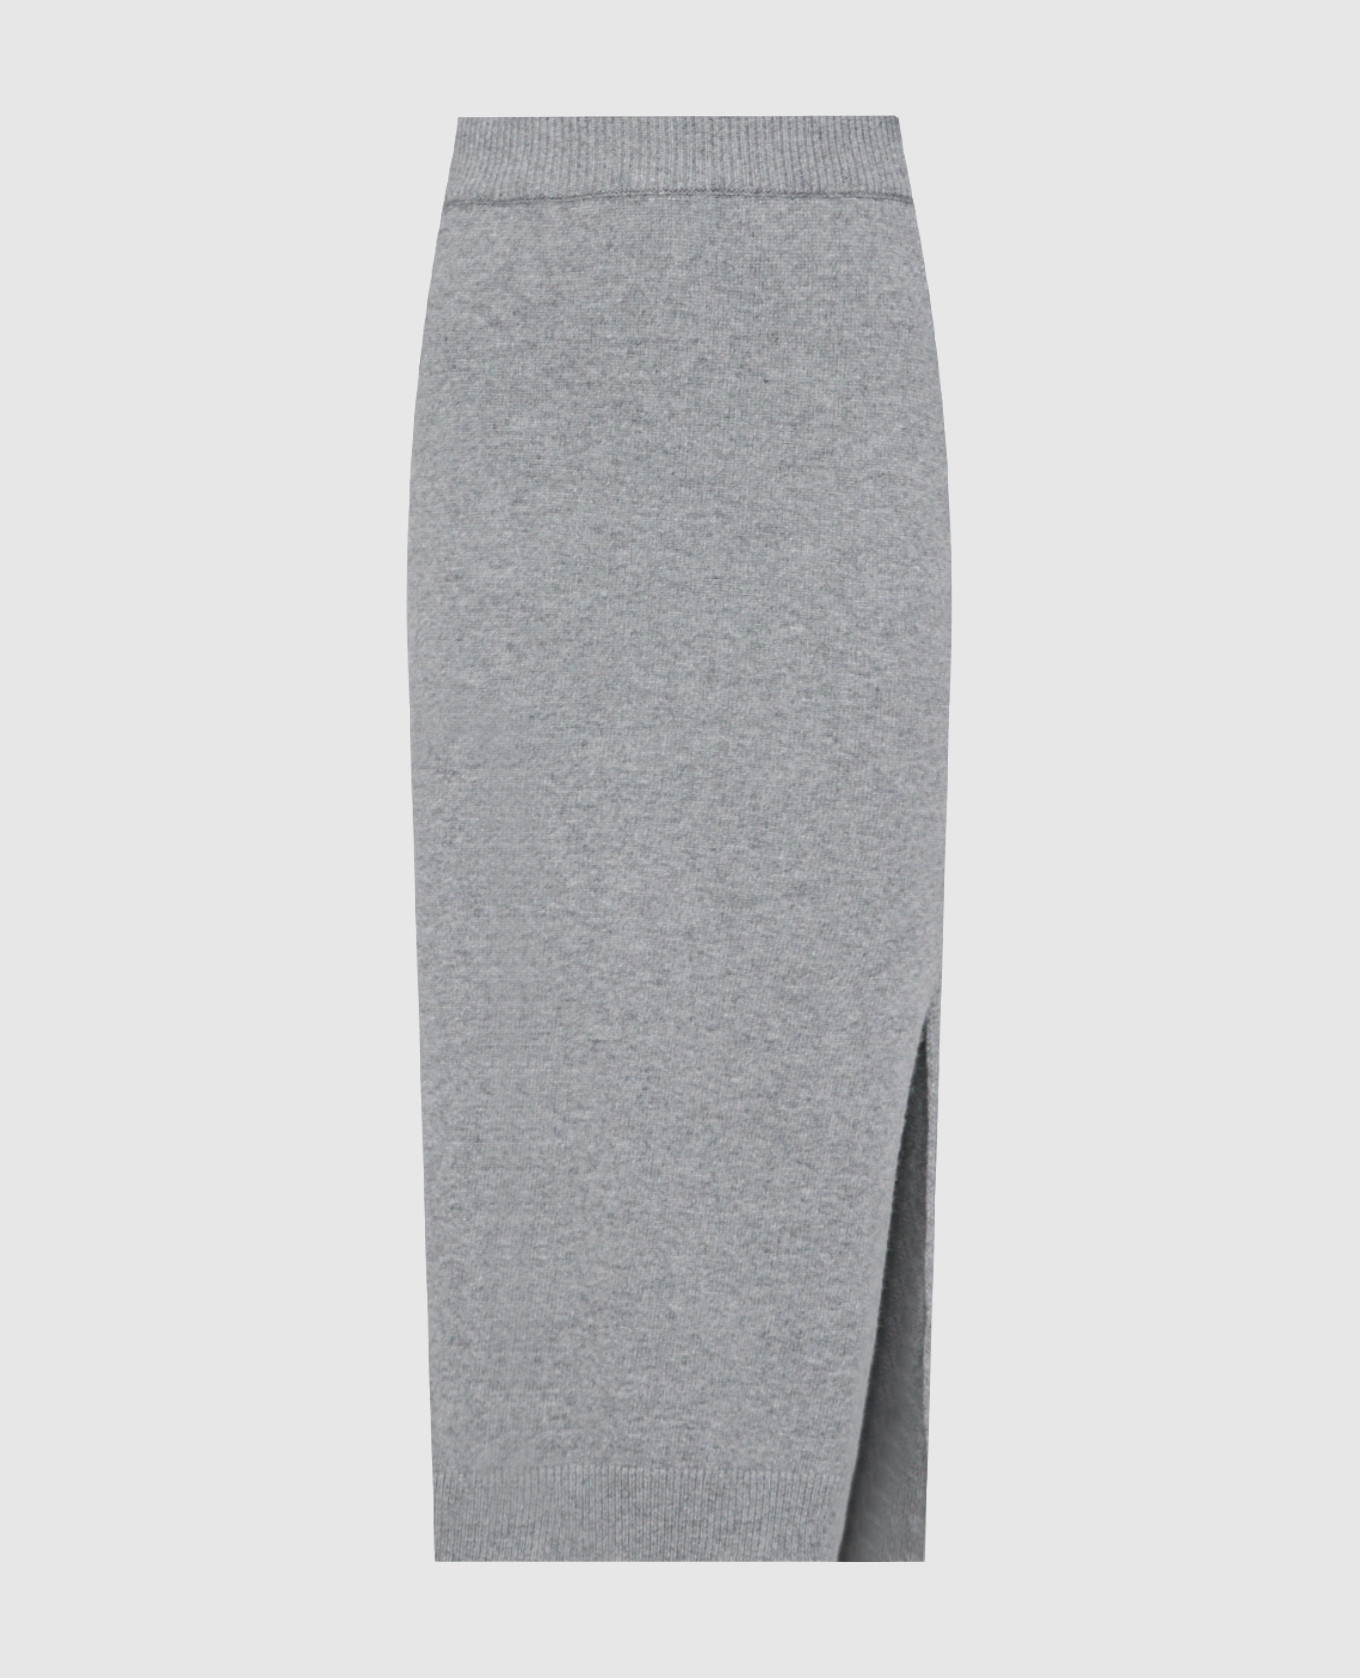 Gray skirt with a slit